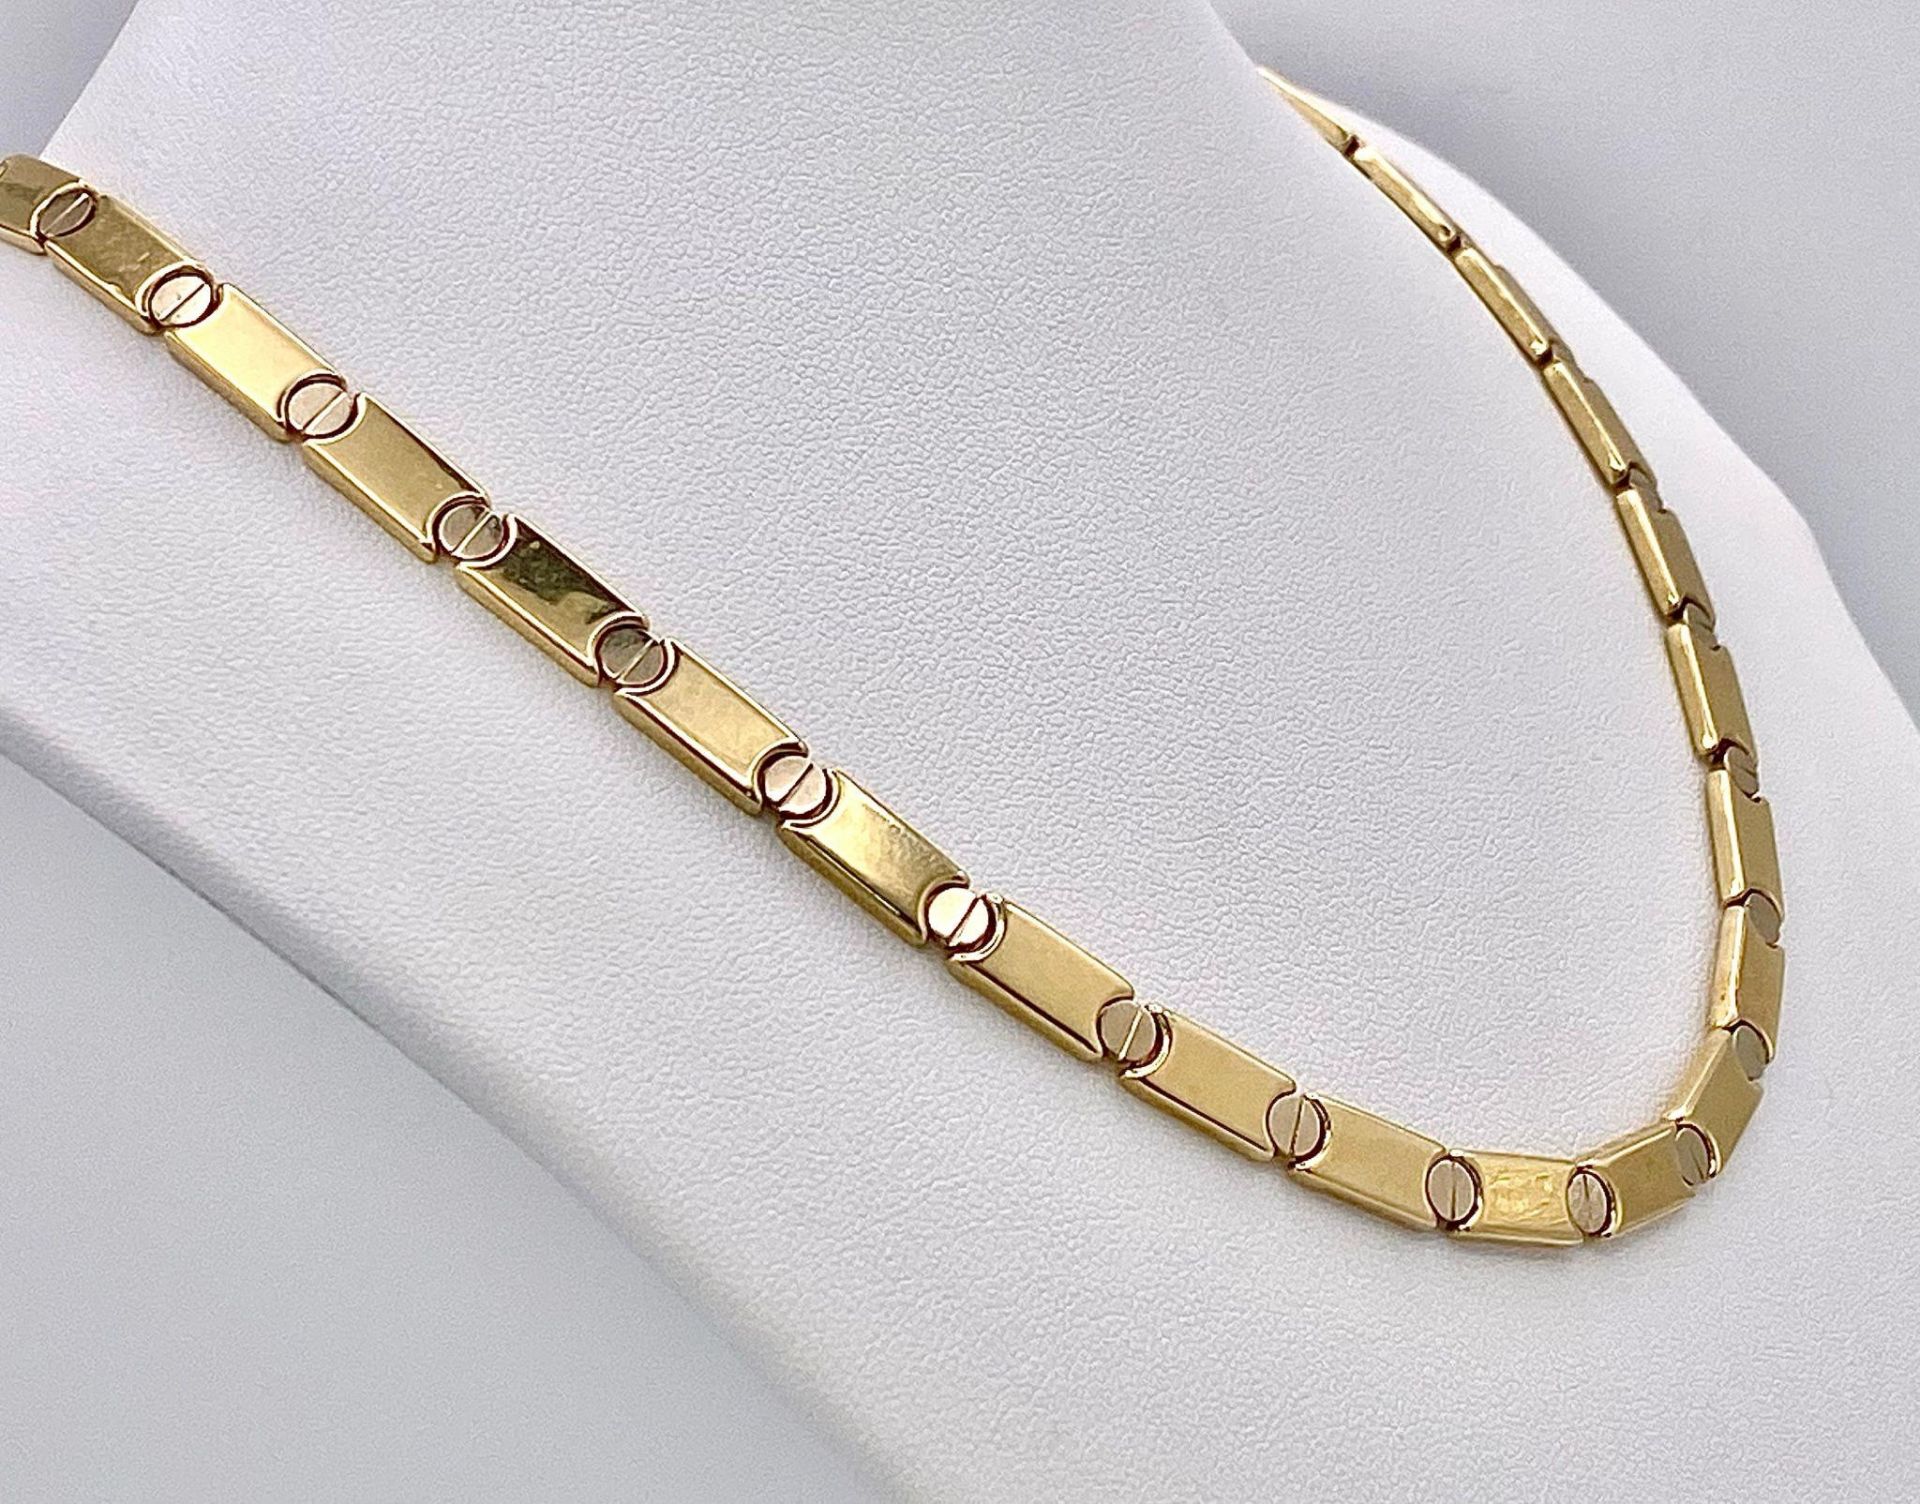 A 14k Yellow Gold Articulated Bar-Link Necklace. Stylish links with screw-esque spacers. 42cm - Image 4 of 12